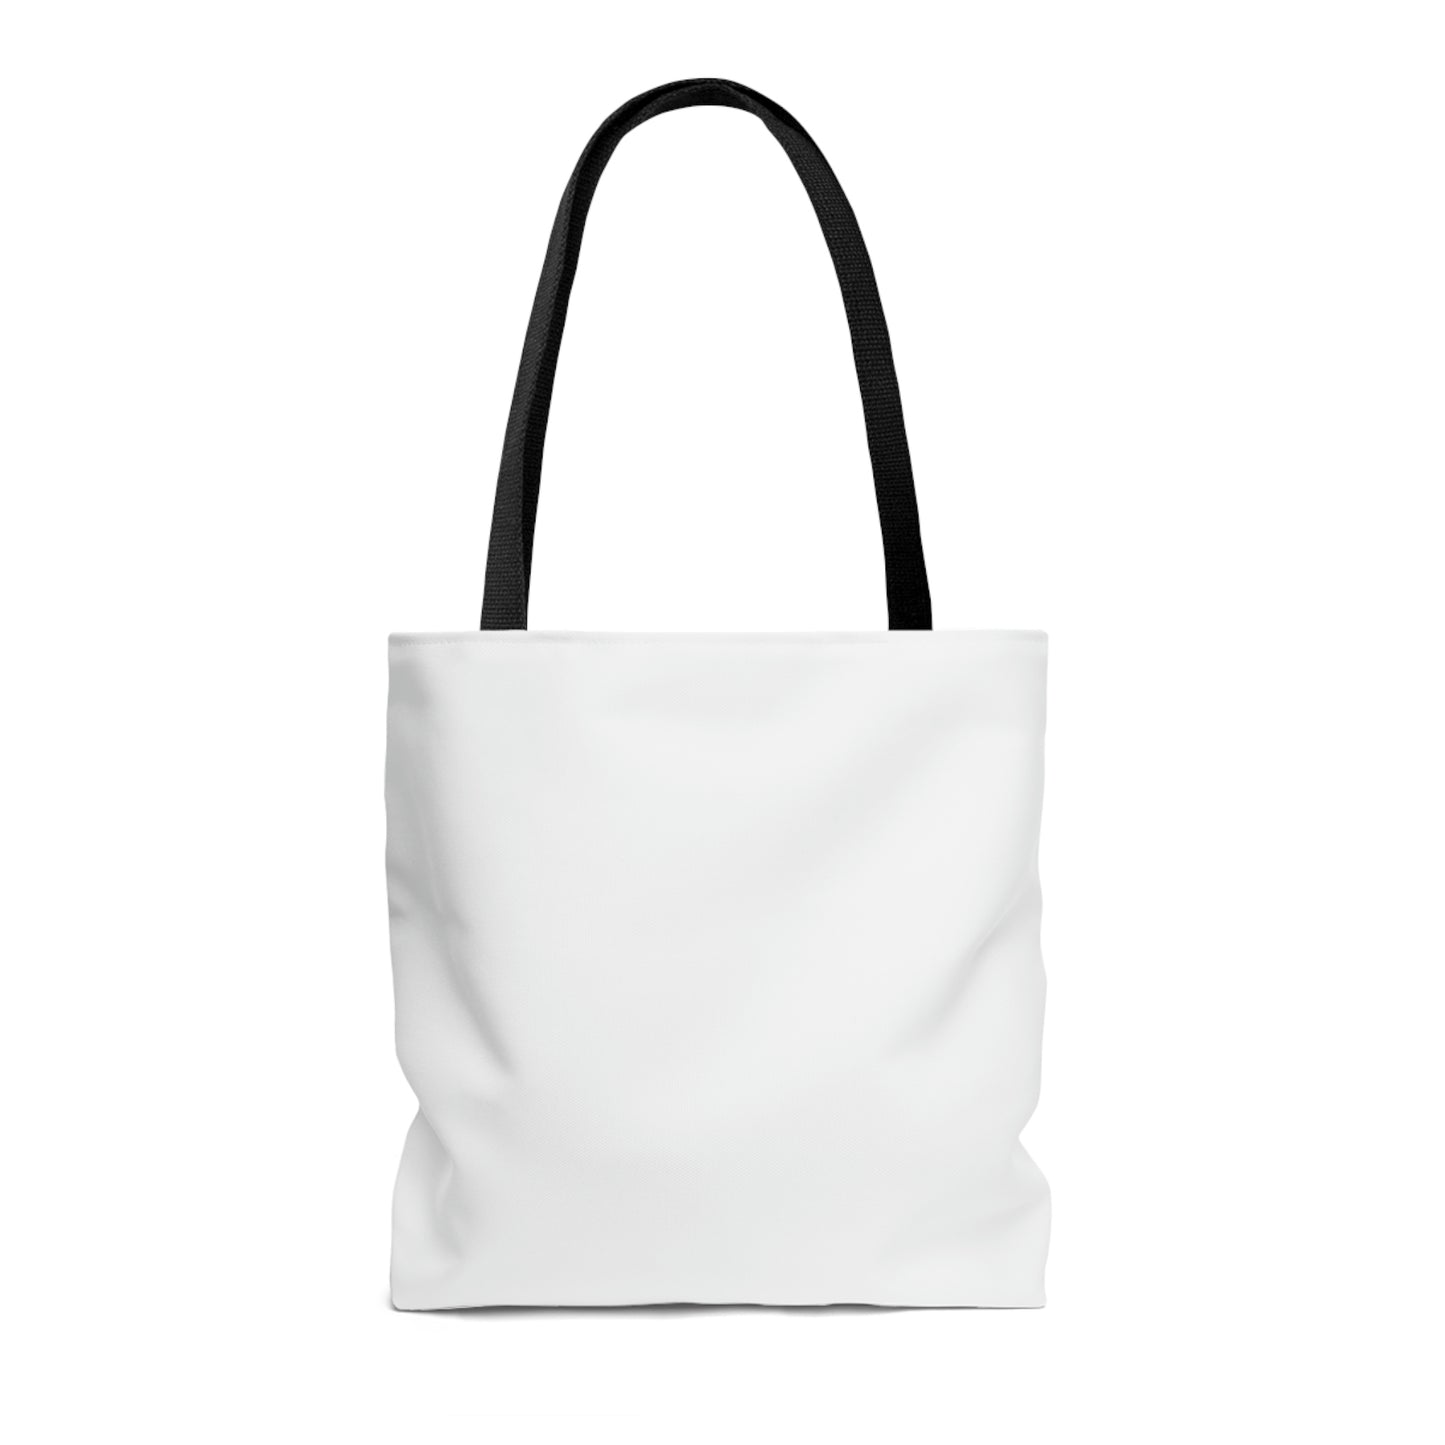 The Bible as Simple as ABC L AOP Tote Bag